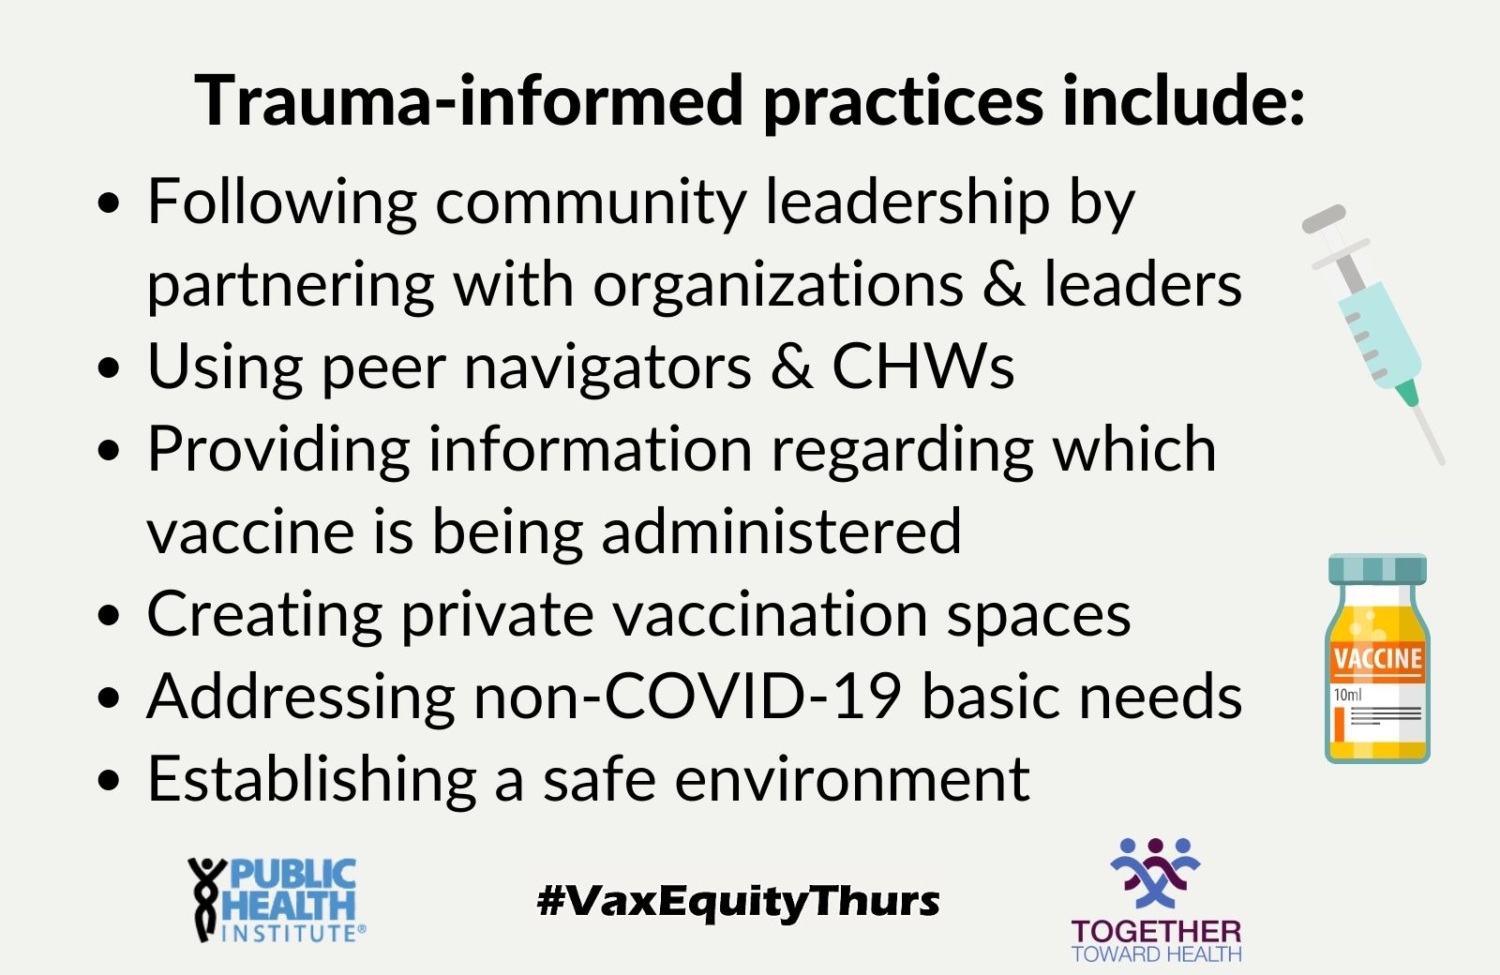 Trauma-informed practices include: Following community leadership by partnering with organizations & leaders Using peer navigators & CHWs Providing information regarding which vaccine is being administered Creating private vaccination spaces Addressing non-COVID-19 basic needs Establishing a safe environment